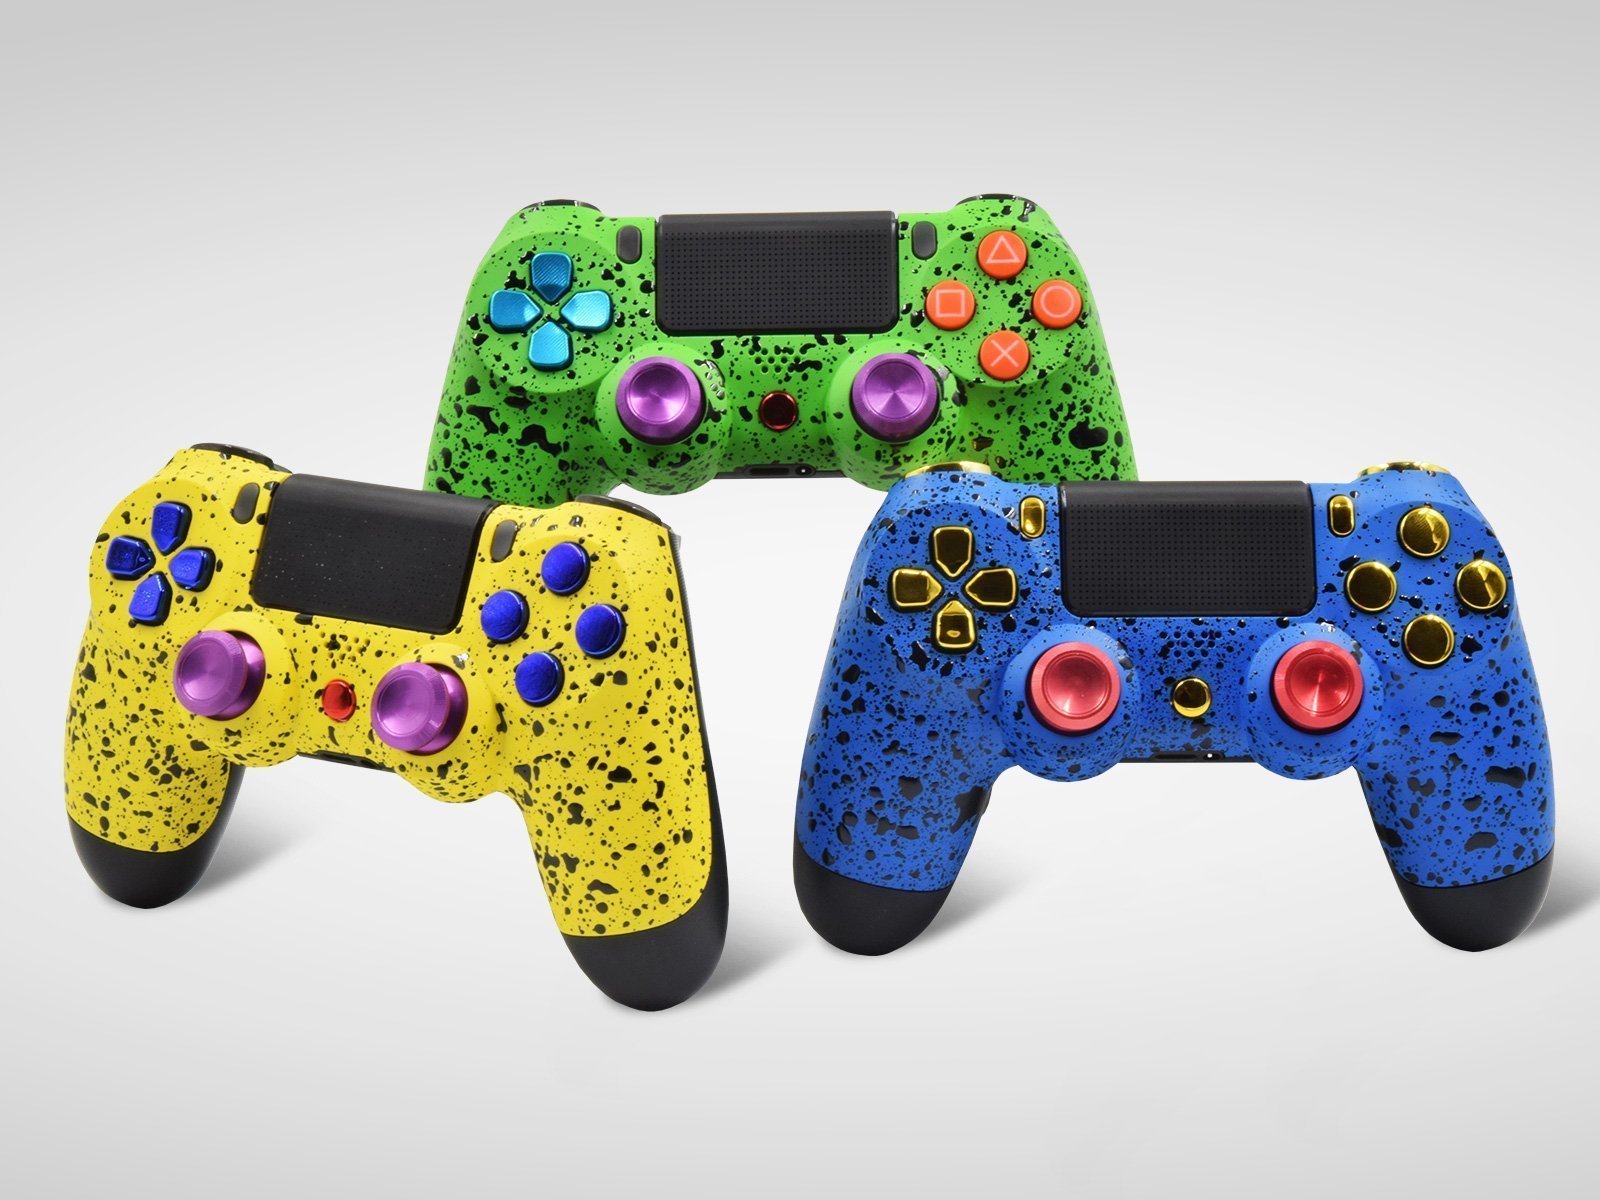 PS4 Limited Edition Controllers